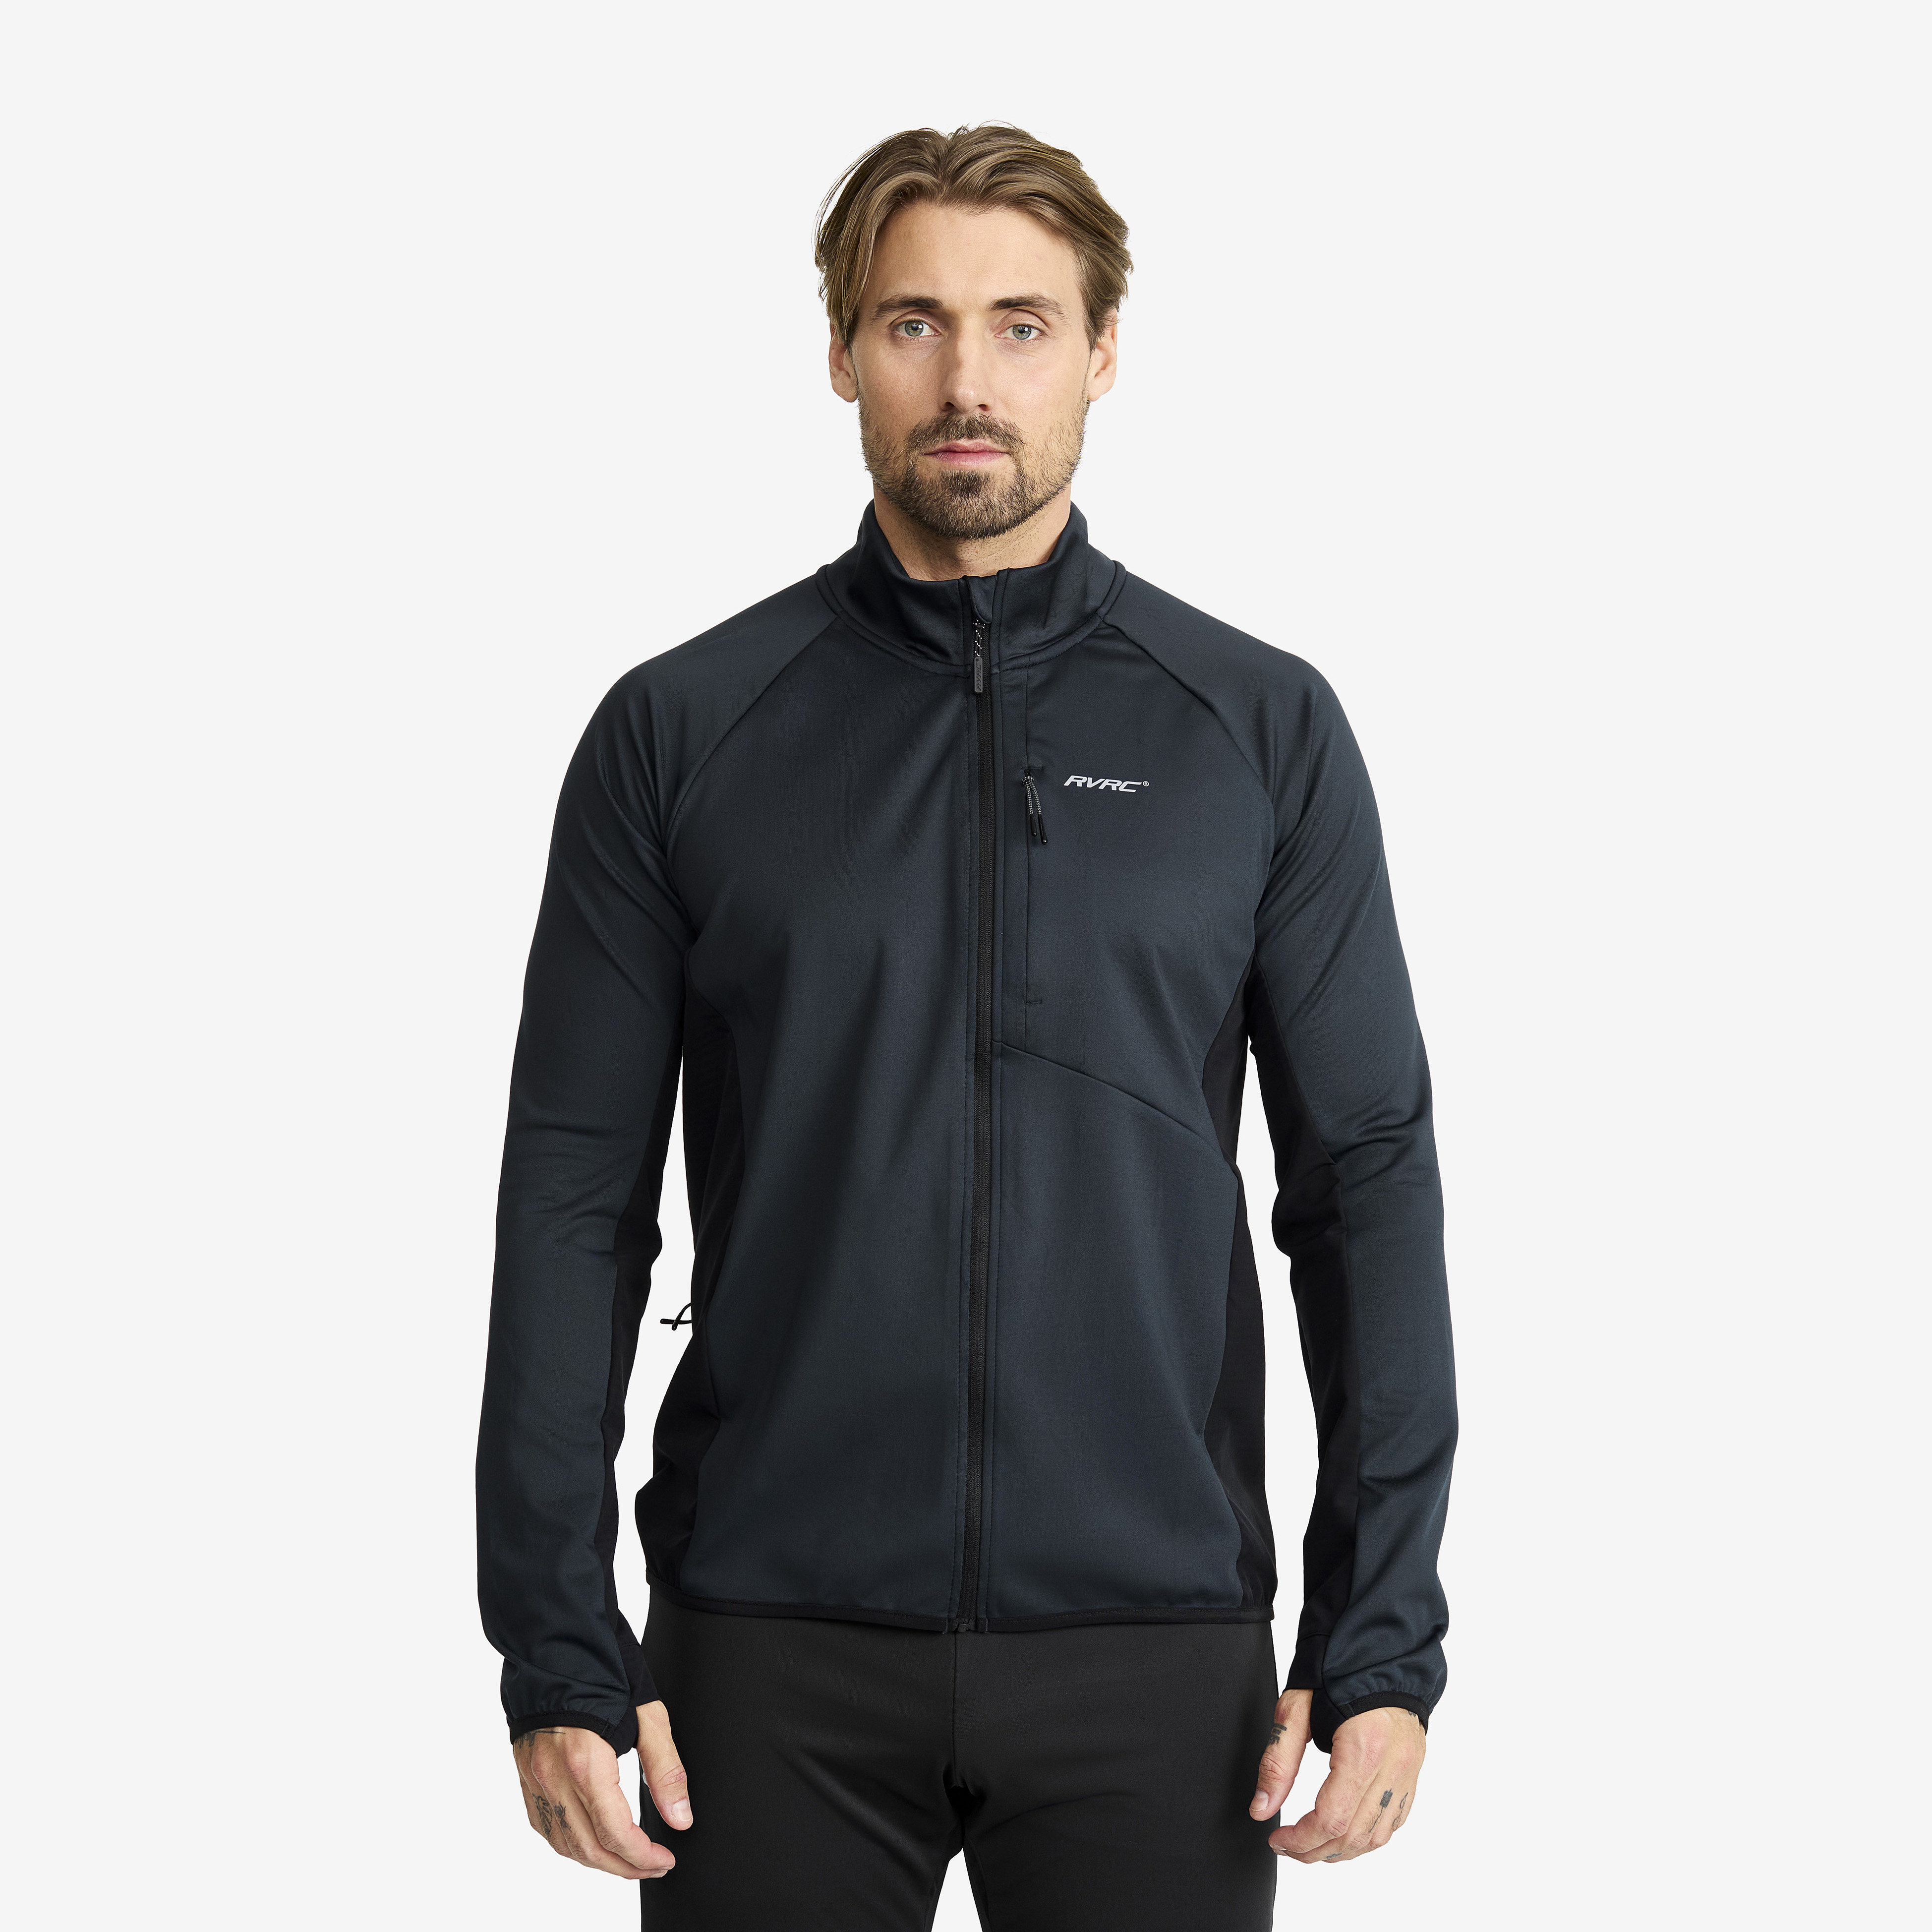 Pace Wind Jacket Blueberry Hombres